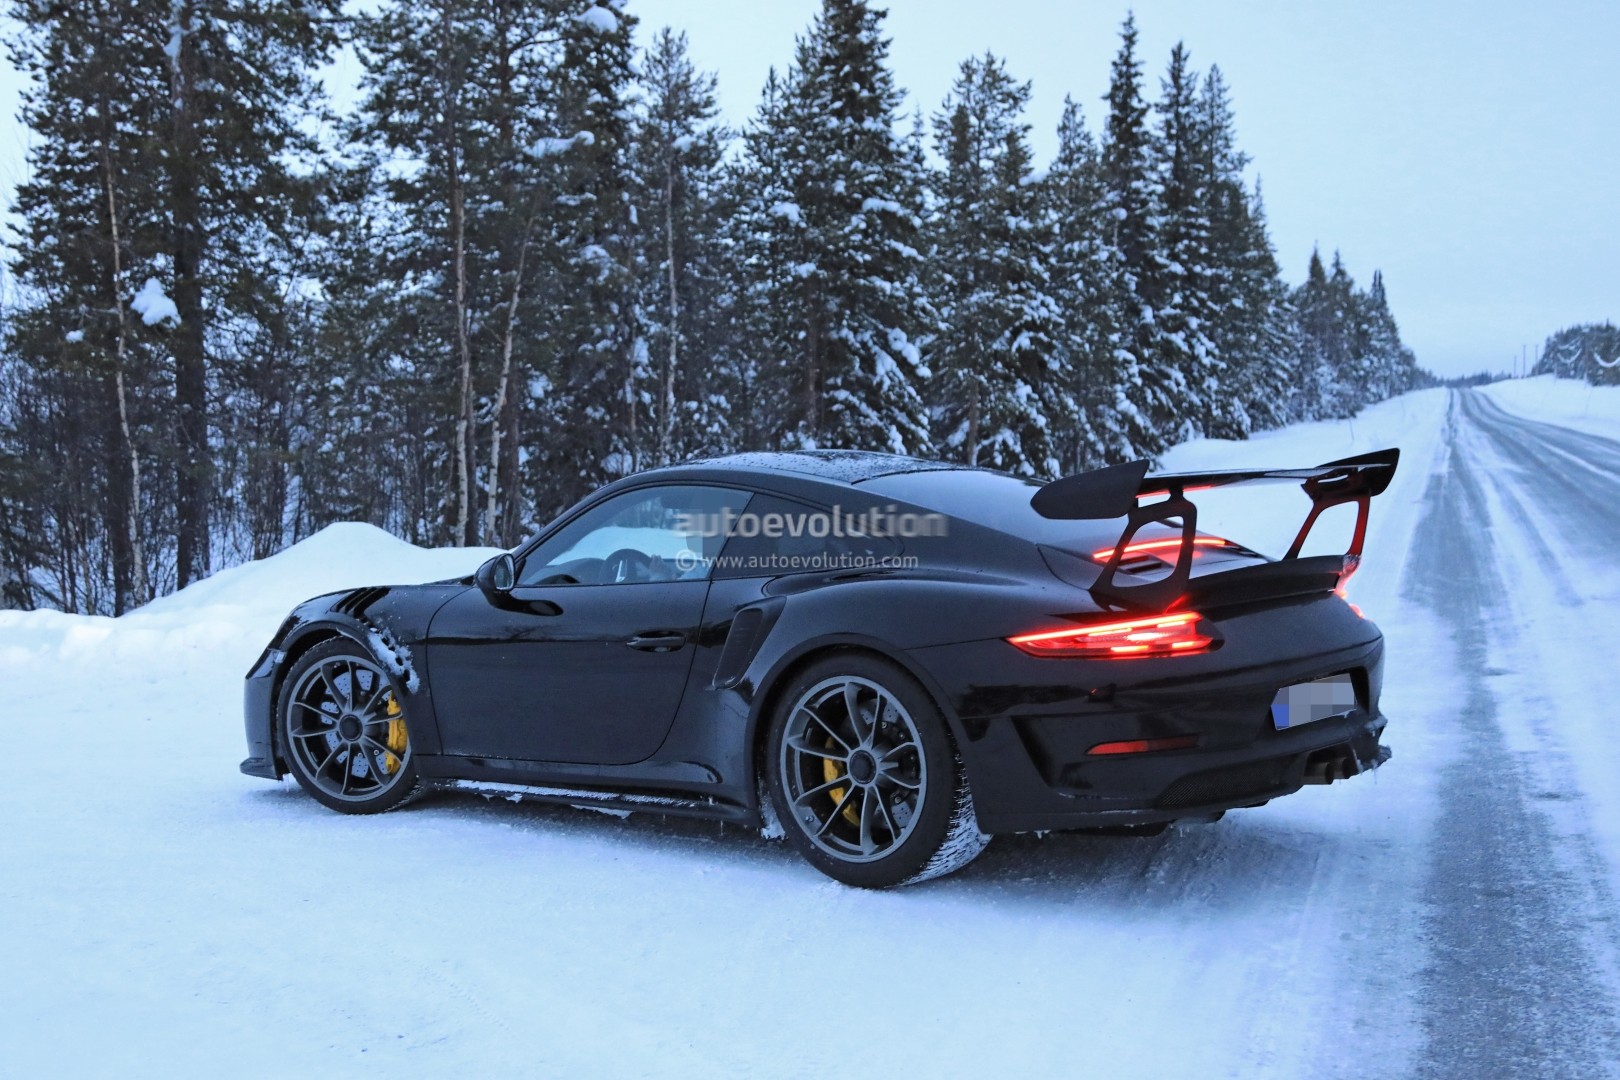 Porsche Gt Rs Fully Revealed By Naked Prototype Has Gt Rs Naca Ducts Autoevolution